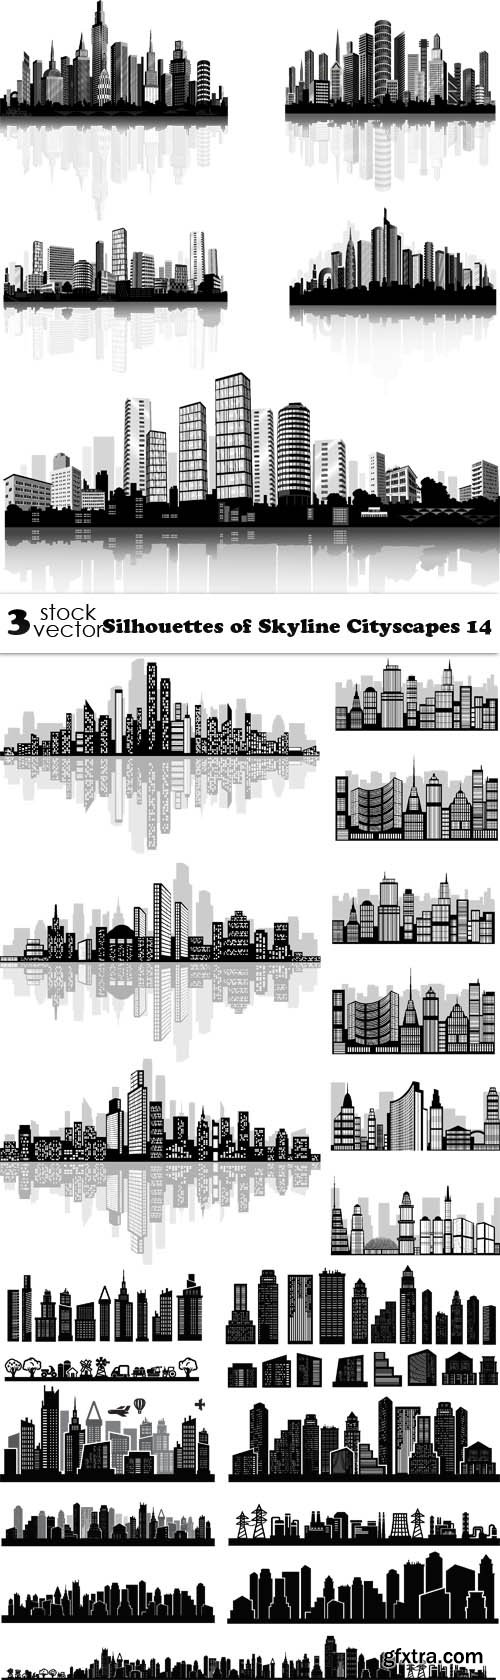 Vectors - Silhouettes of Skyline Cityscapes 14